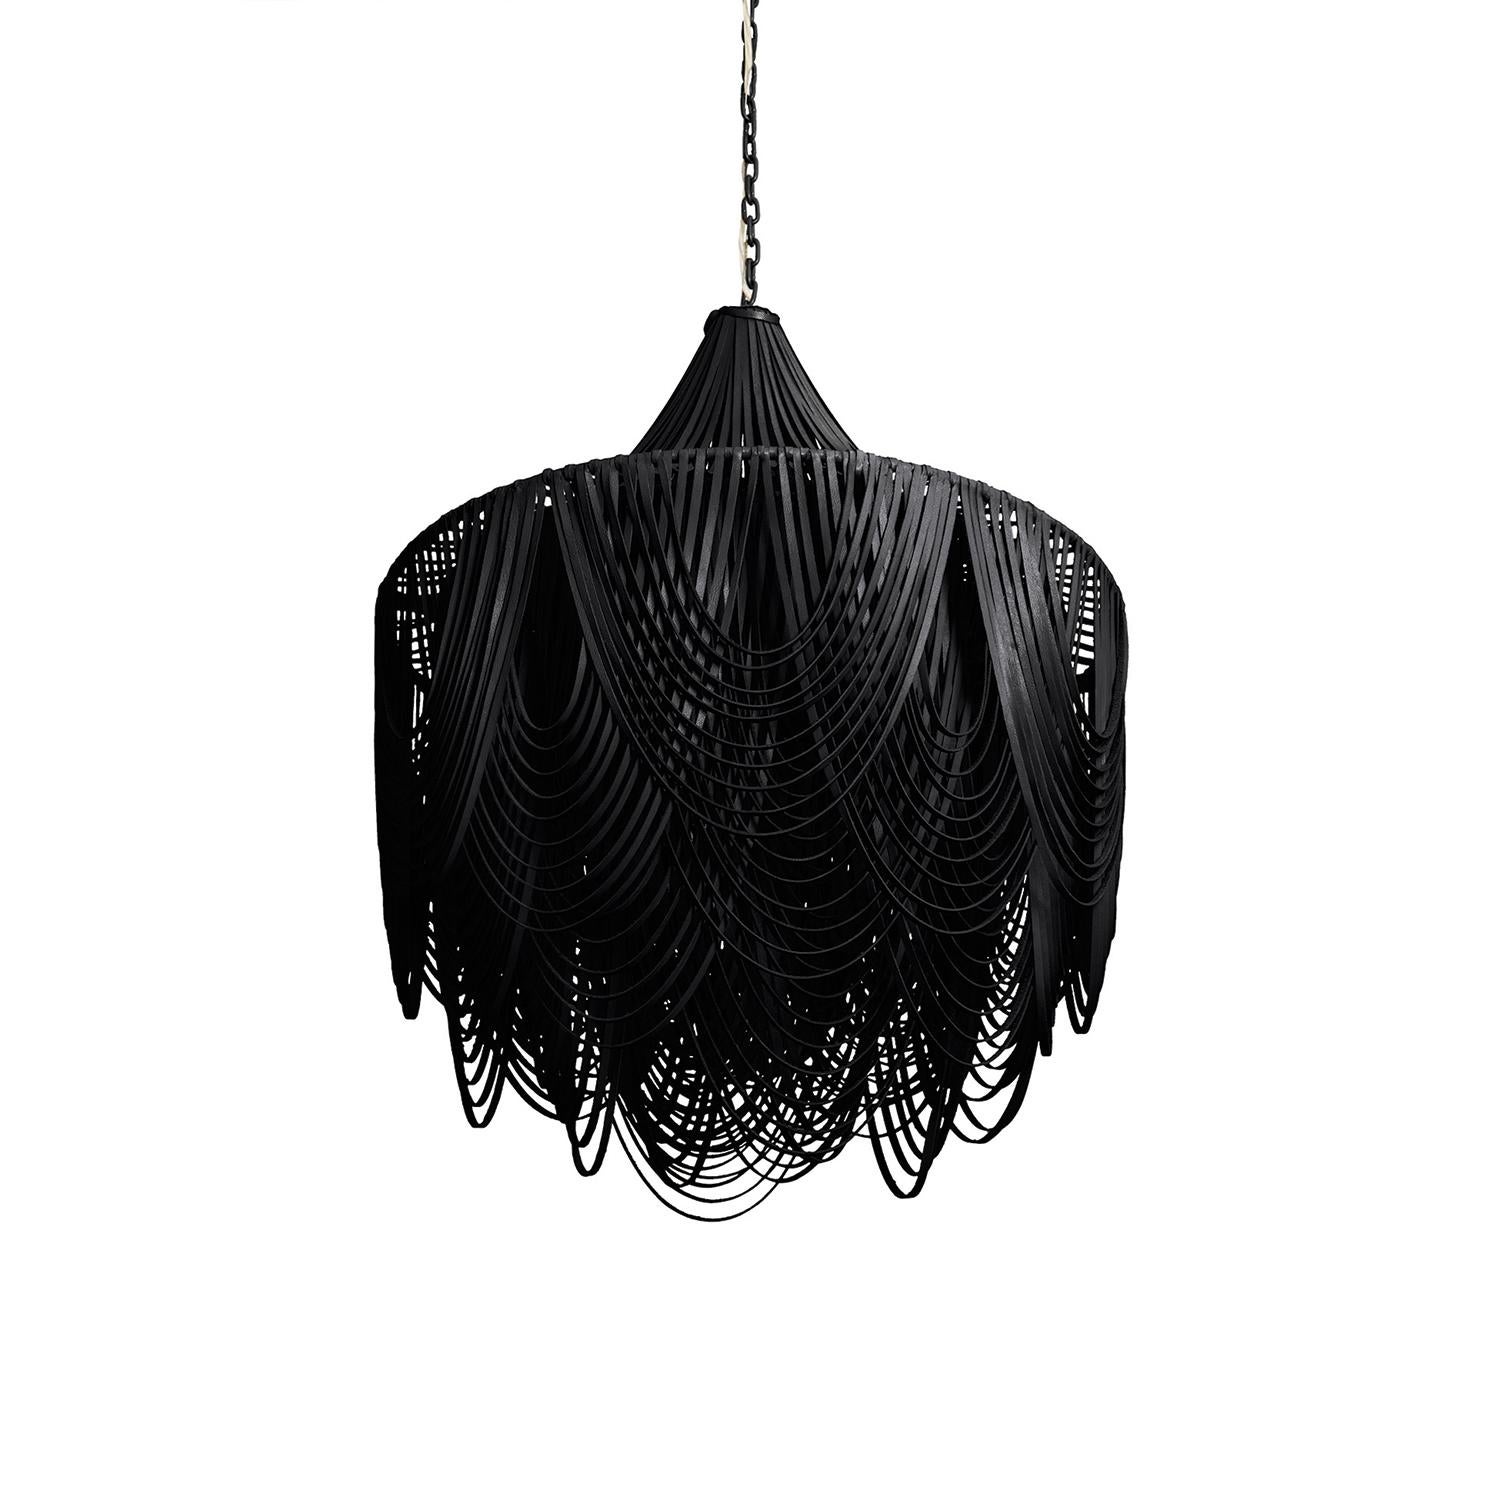 Hand-Crafted Chandelier - Medium-Short Whisper in Black Leather For Sale